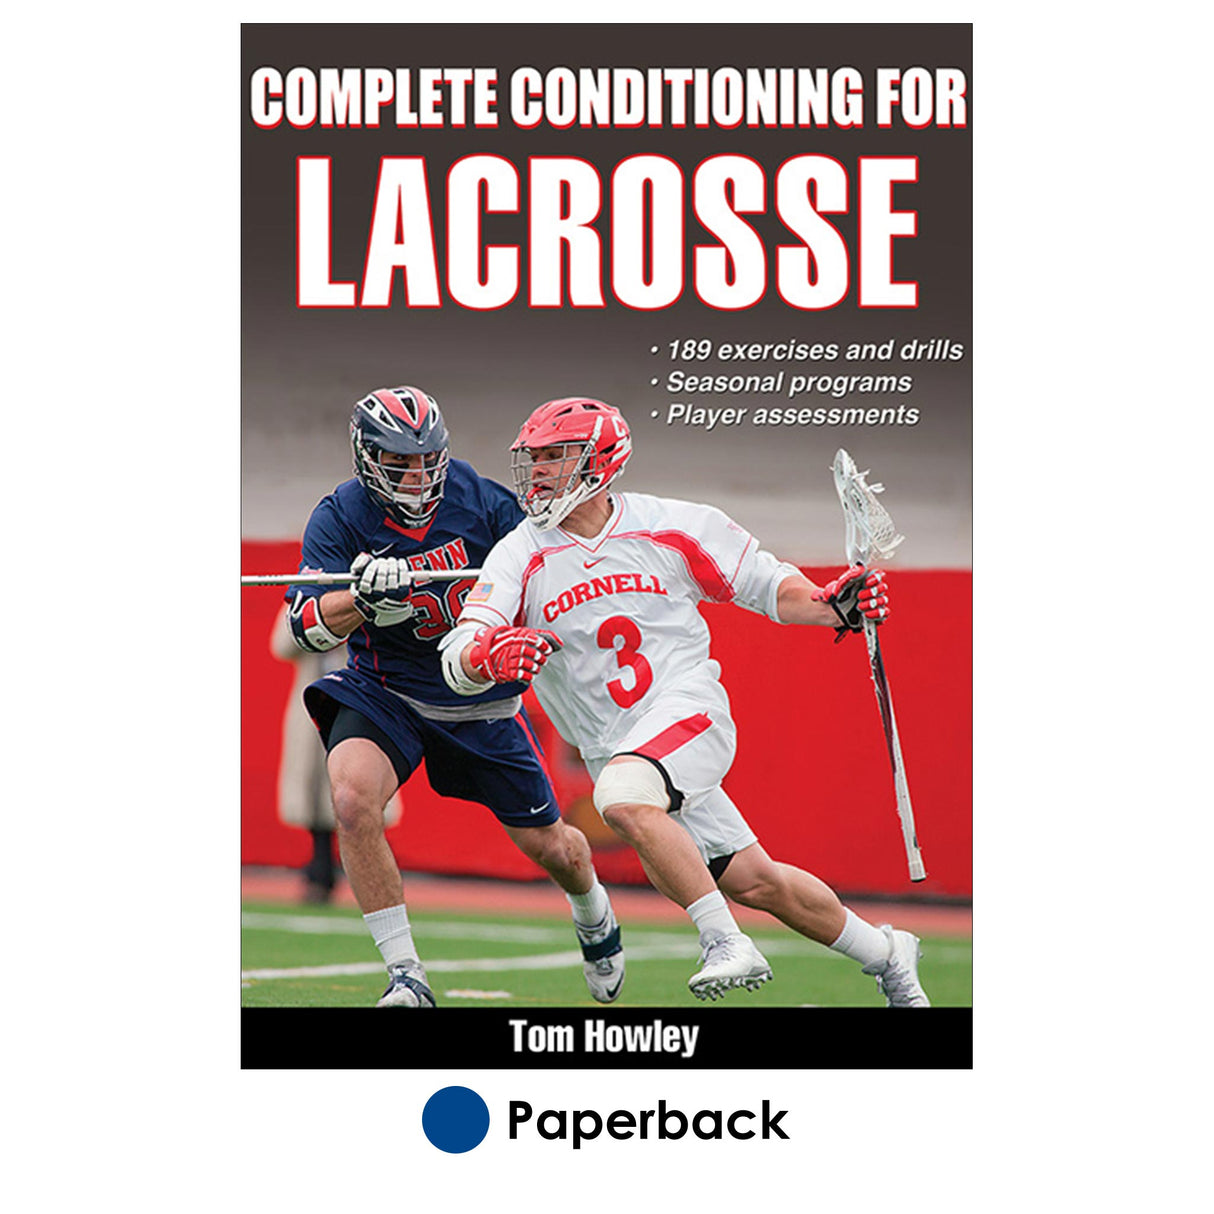 Complete Conditioning for Lacrosse